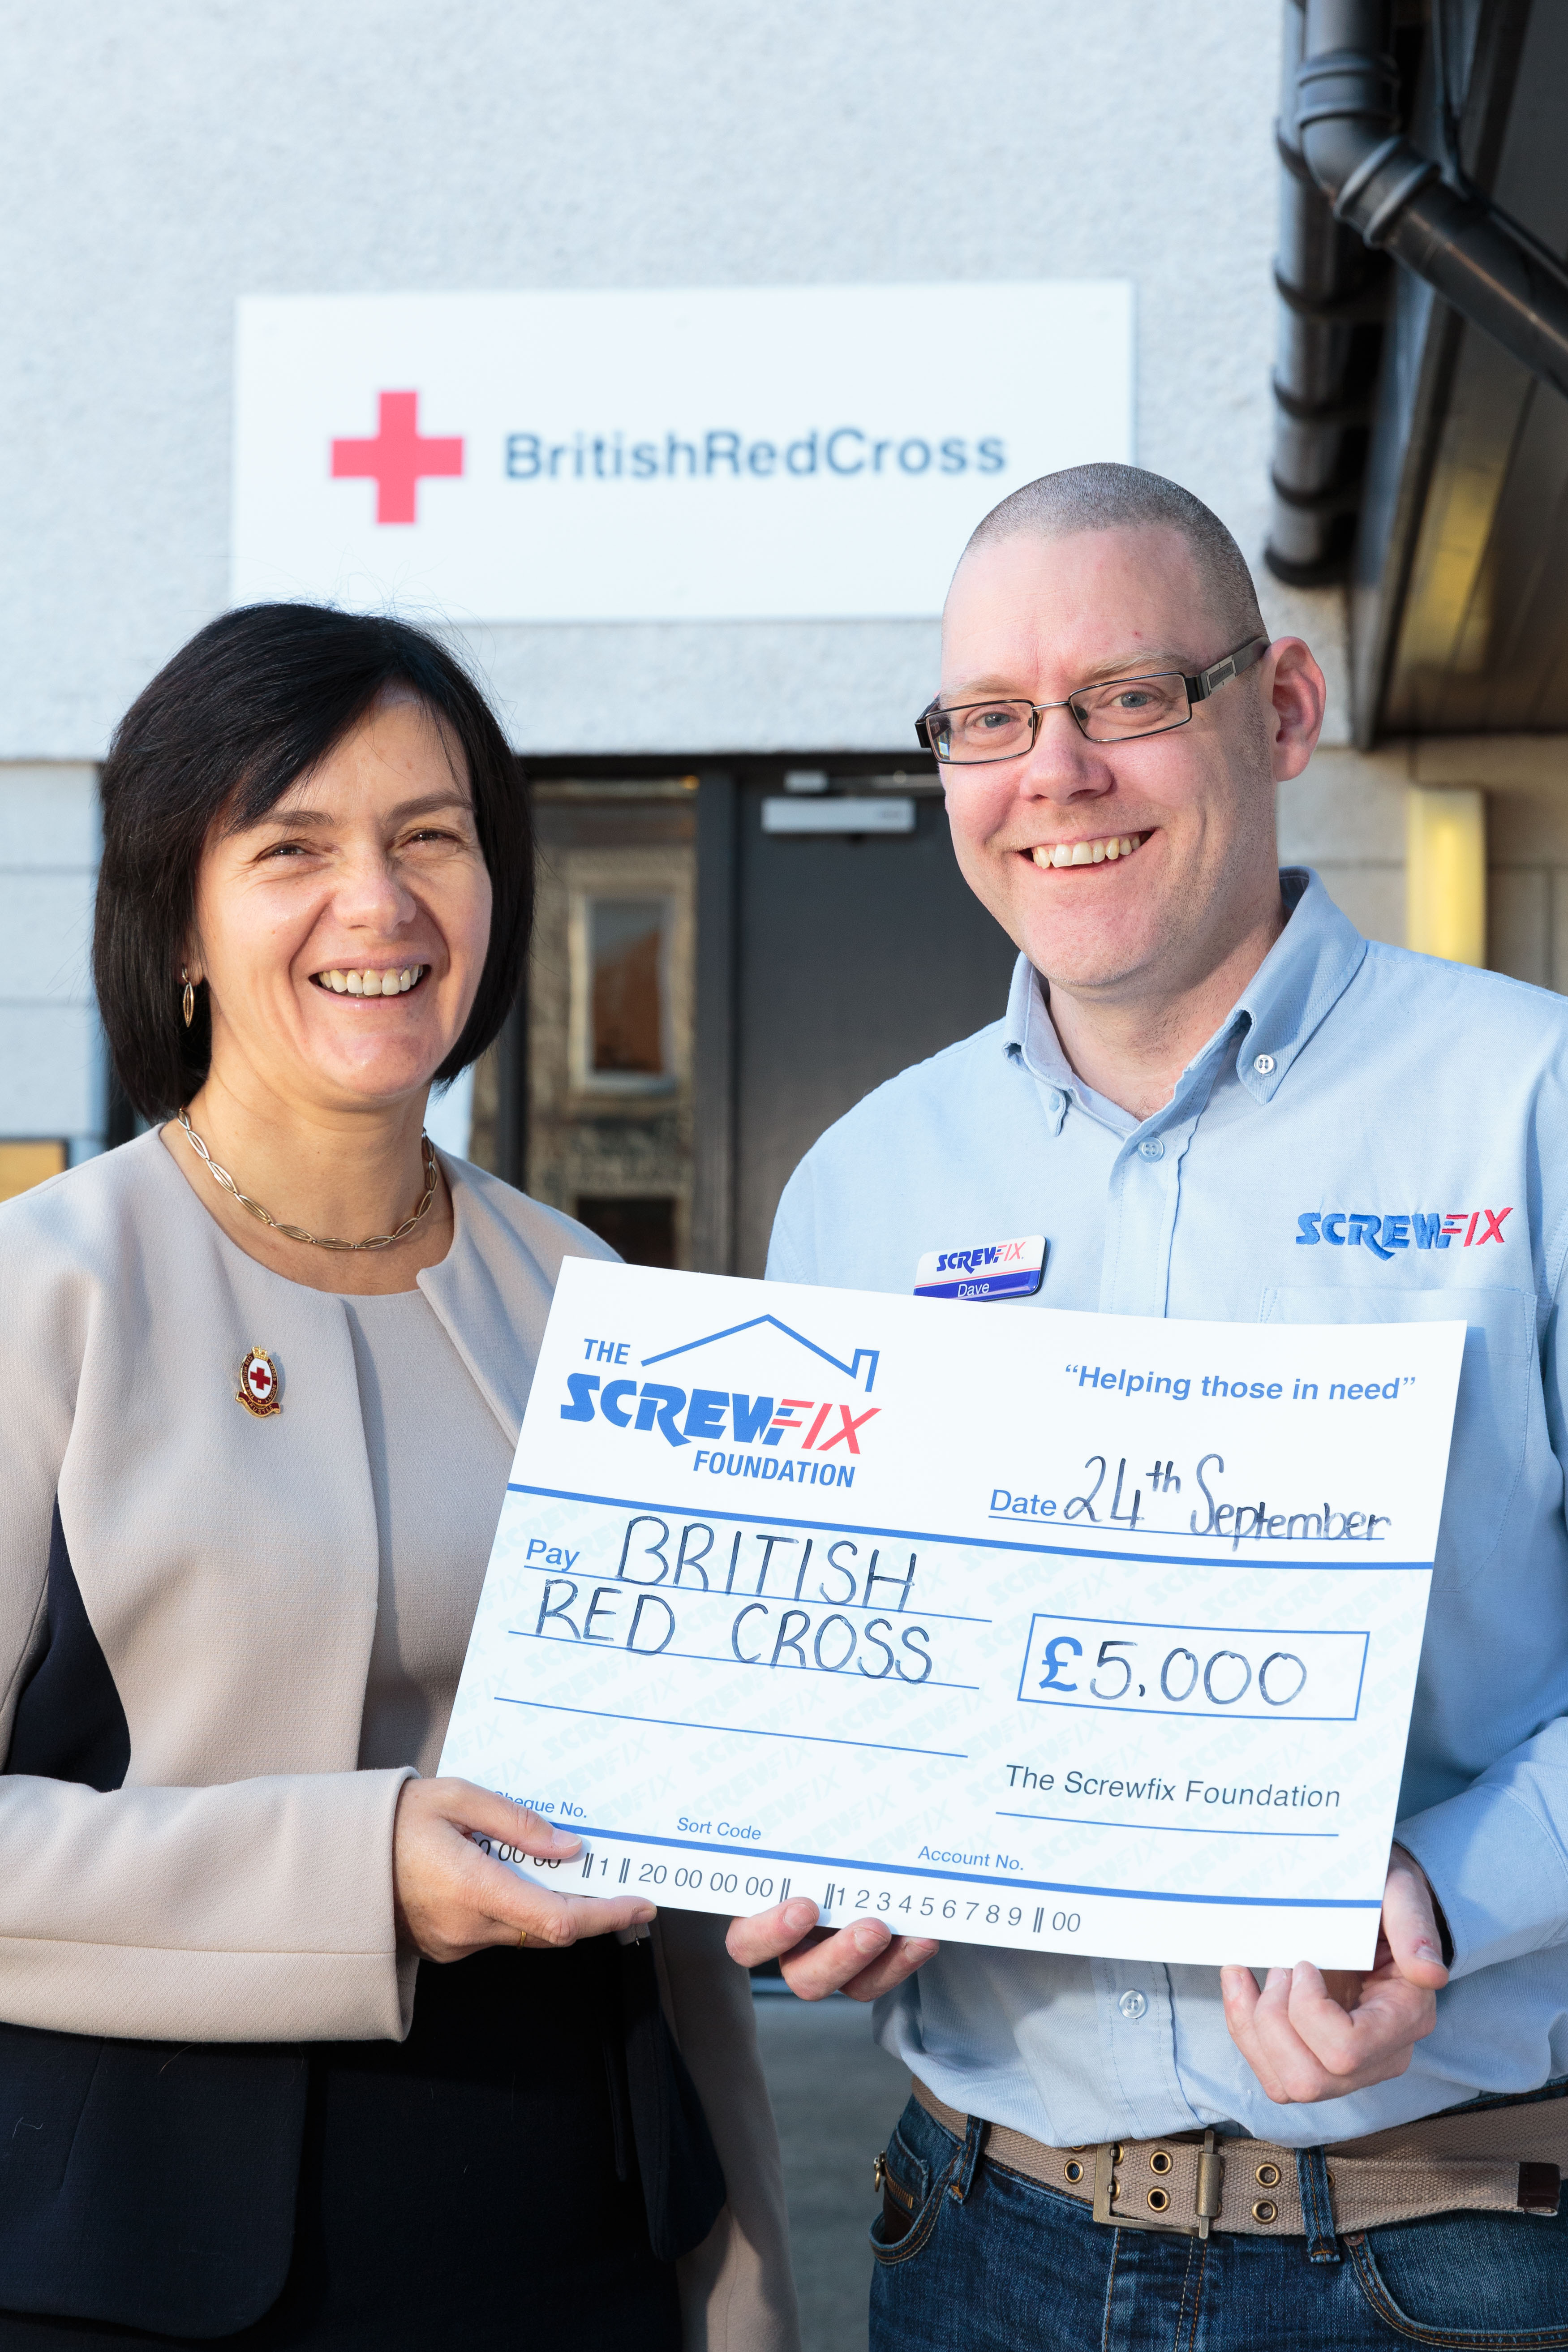 Northern Scotland based charity gets a helping hand from The Screwfix Foundation